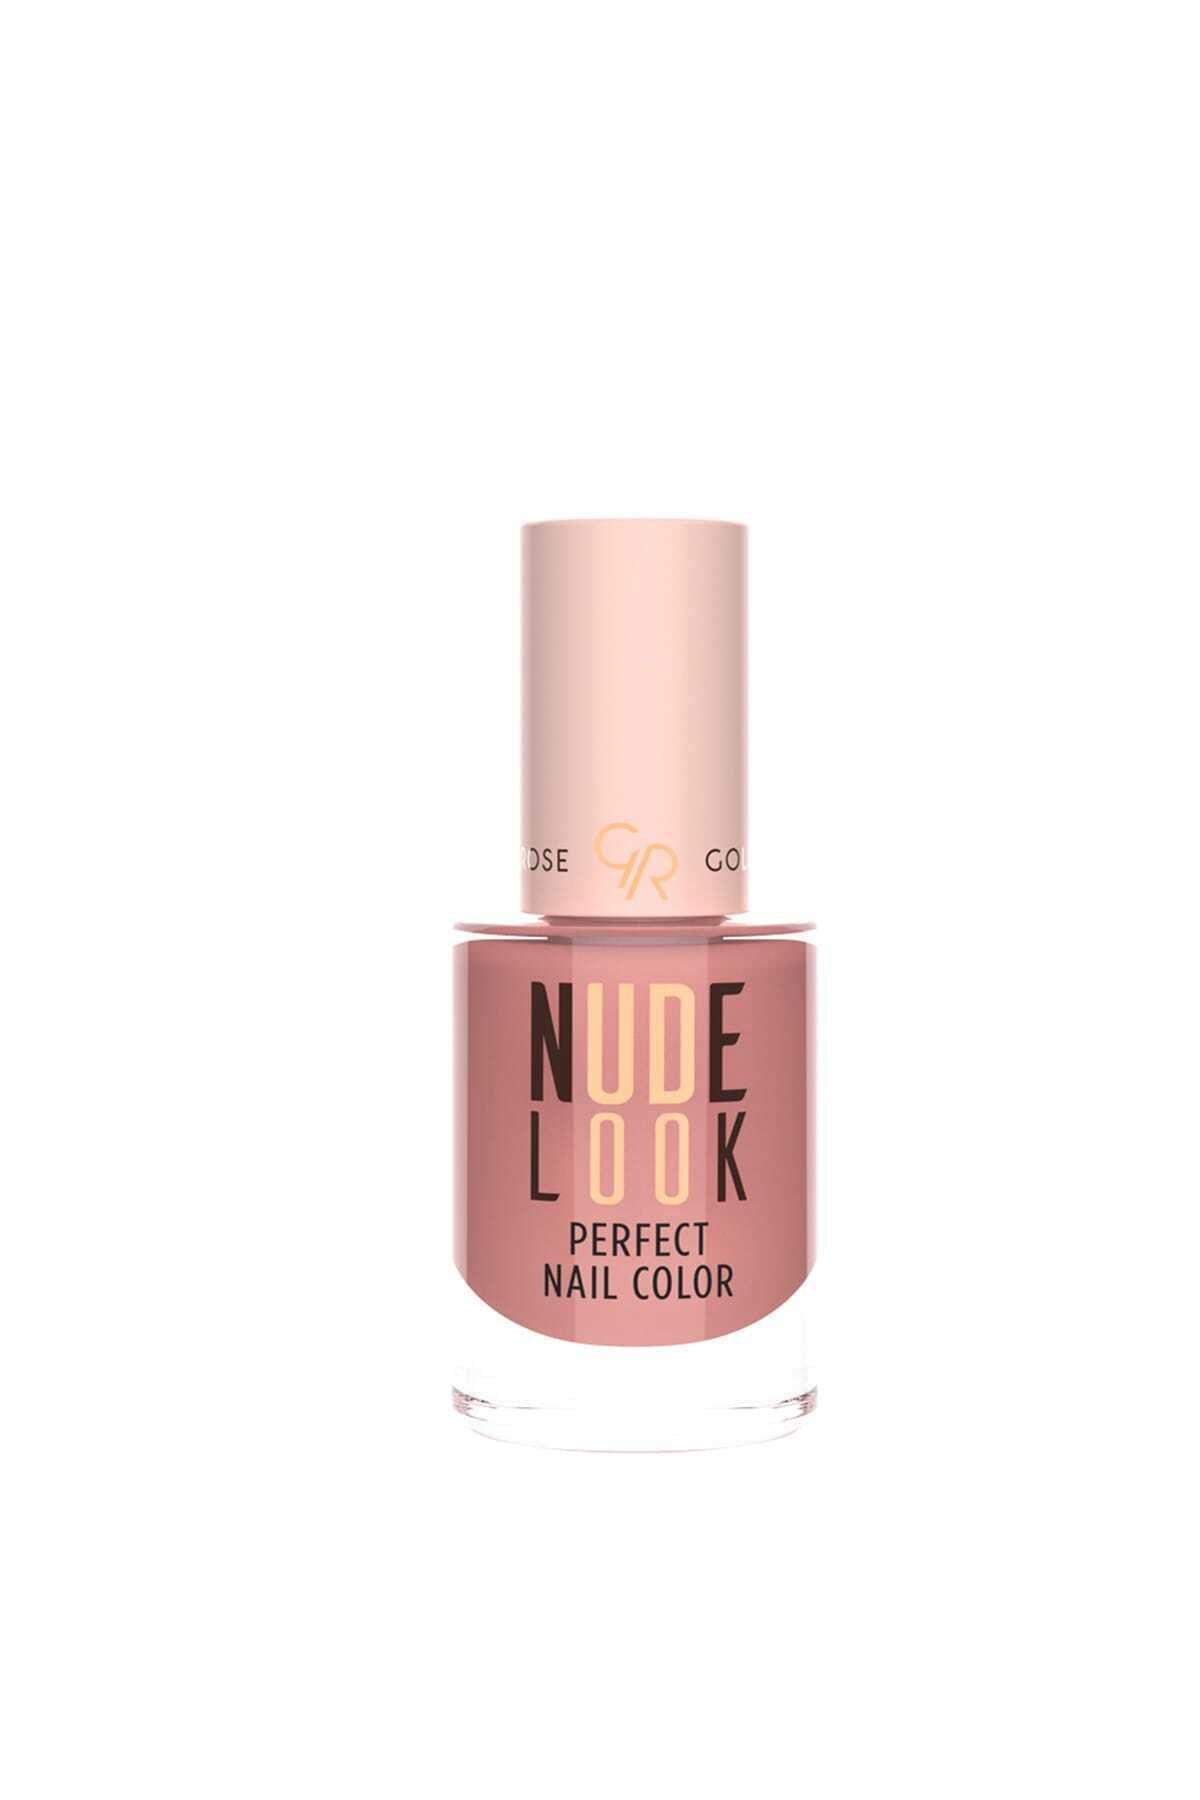 Golden Rose Oje - Nude Look Perfect Nail Color No:04 Coral Nude  Oje